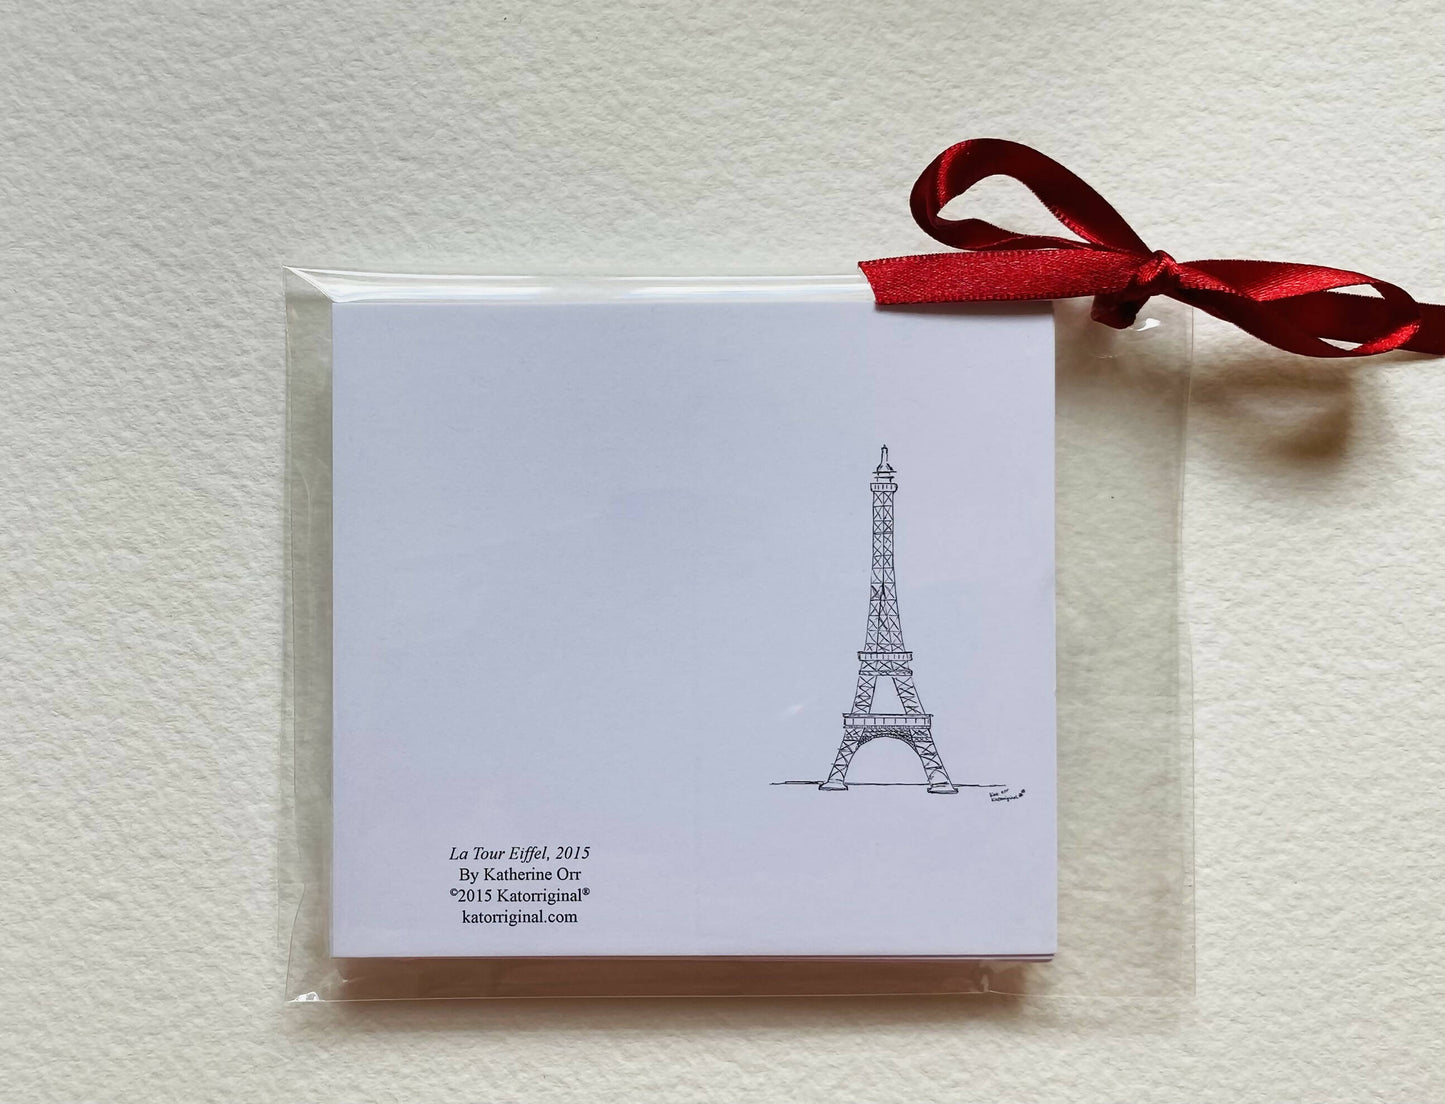 Small Giftcards "La Tour Eiffel" by Katherine Orr